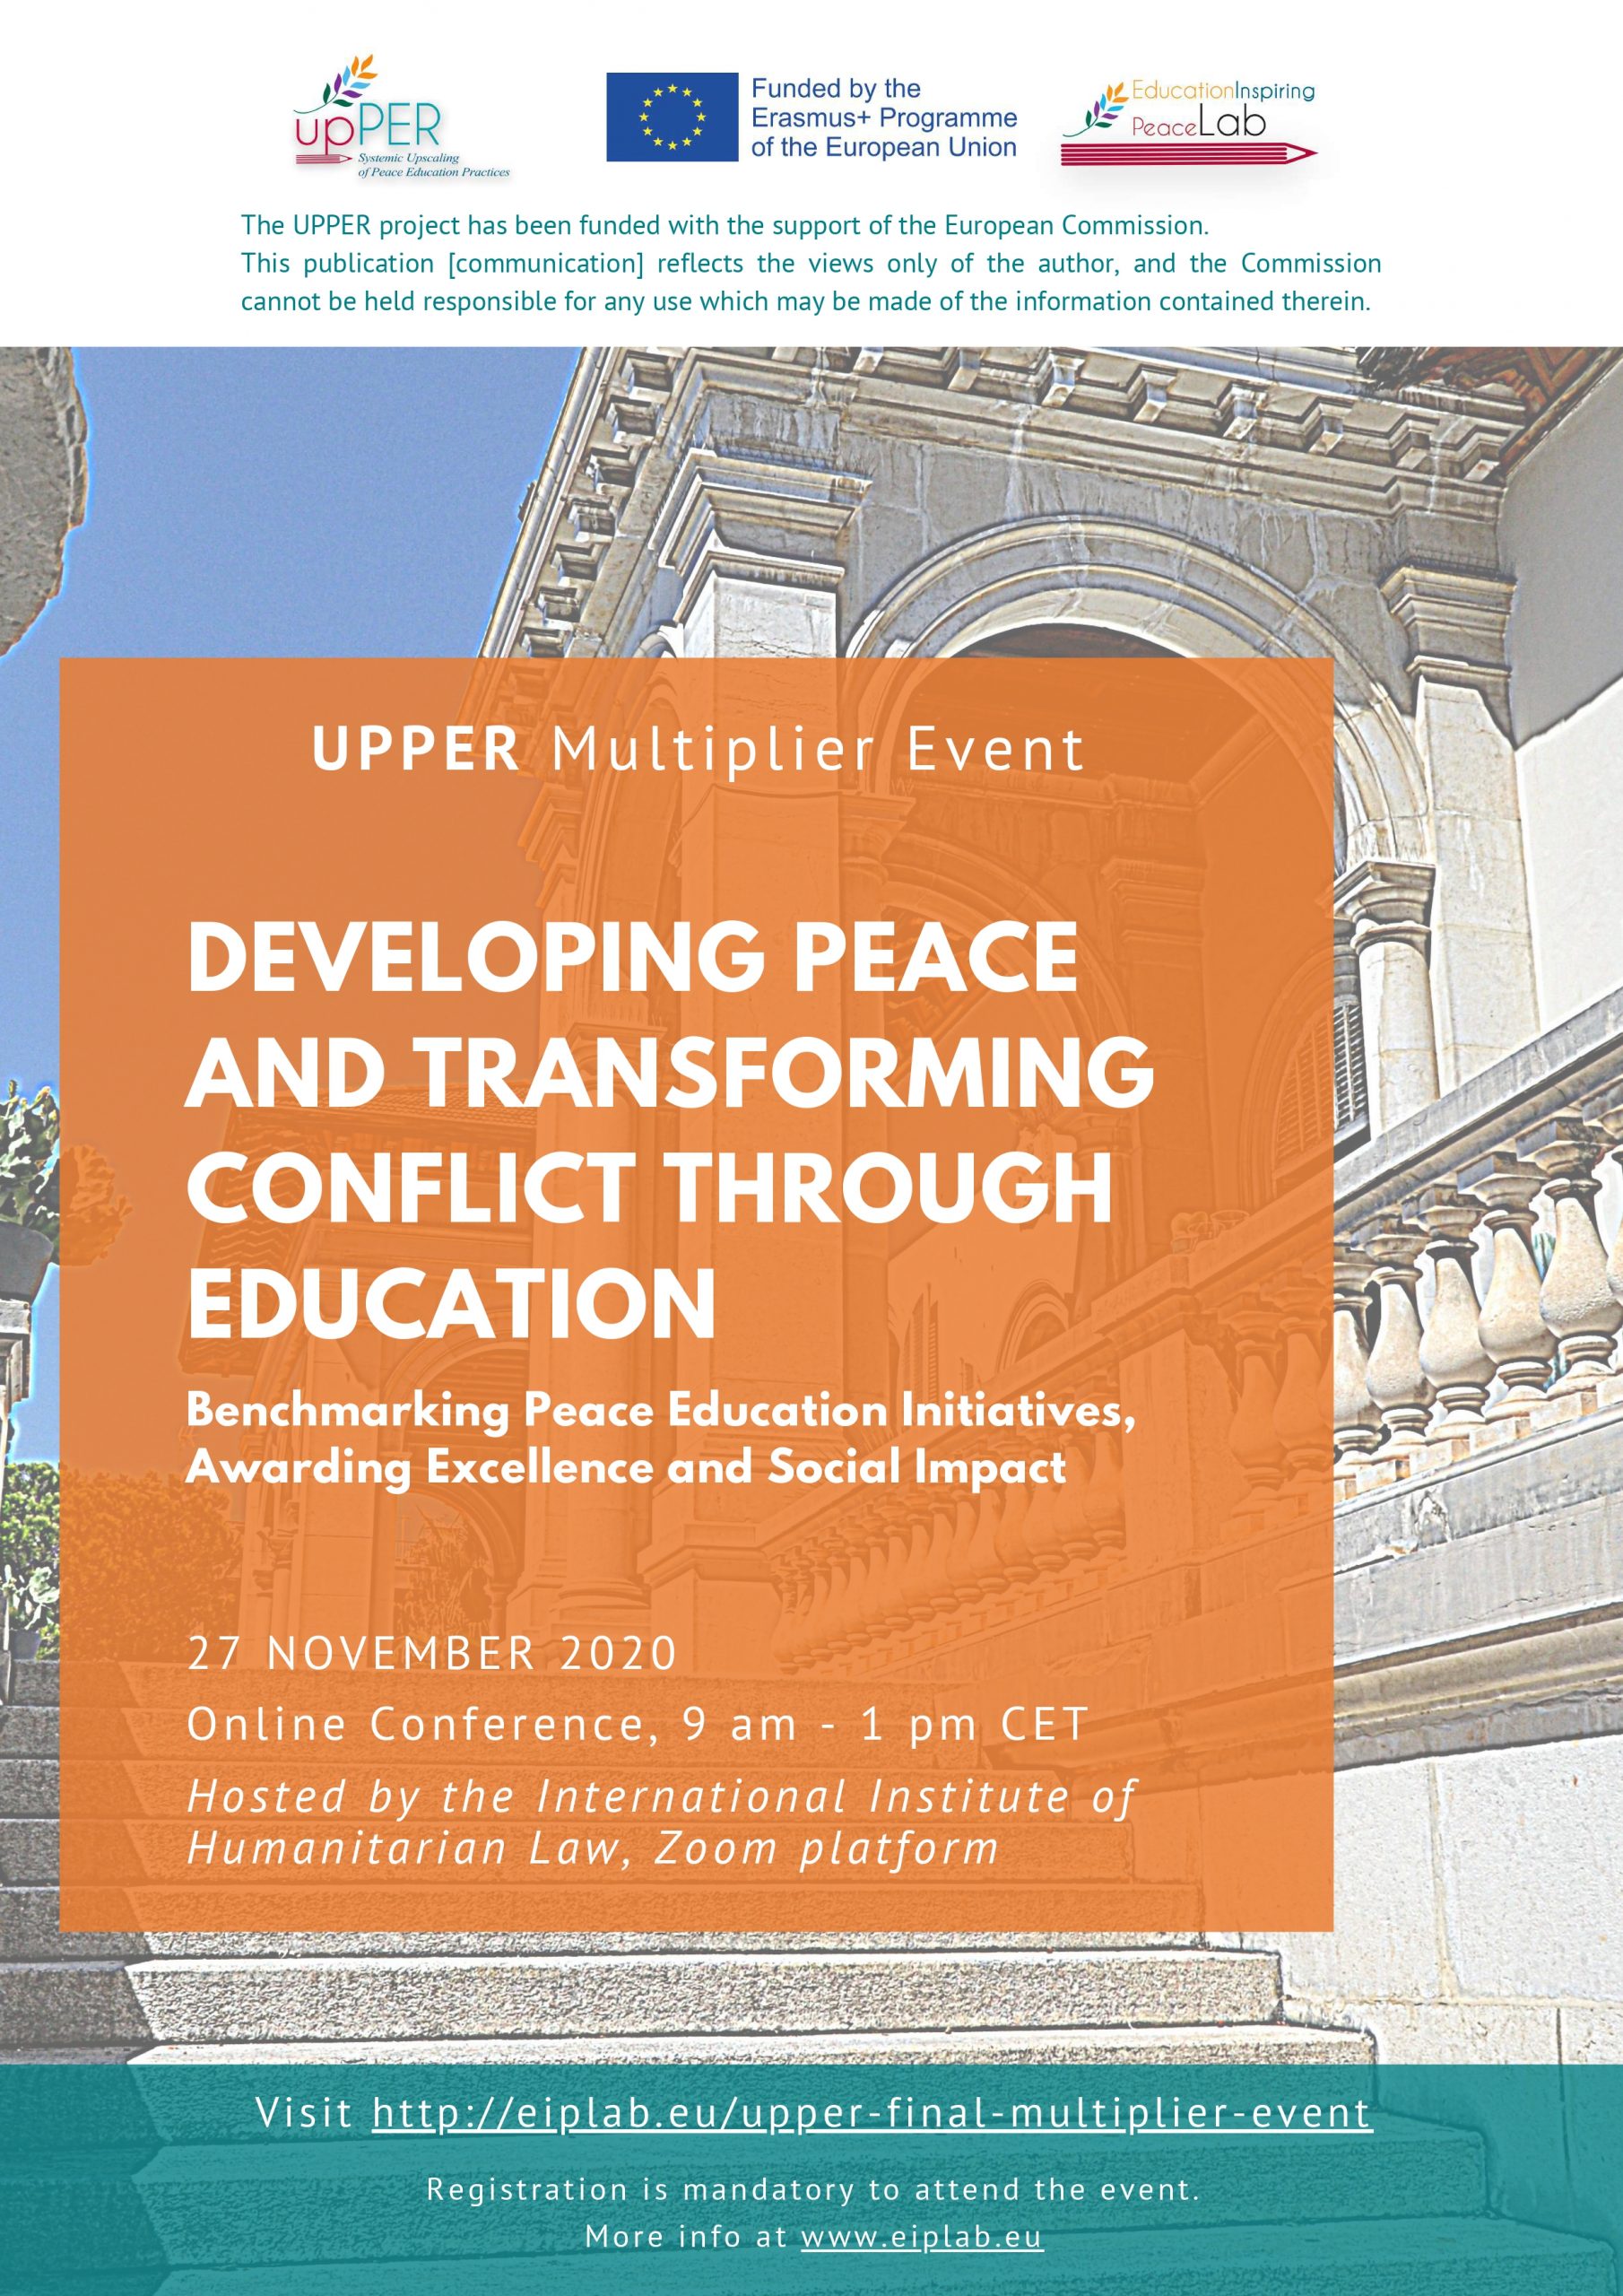 UPPER Final Multiplier Event – Developing Peace and Transforming Conflict through Education